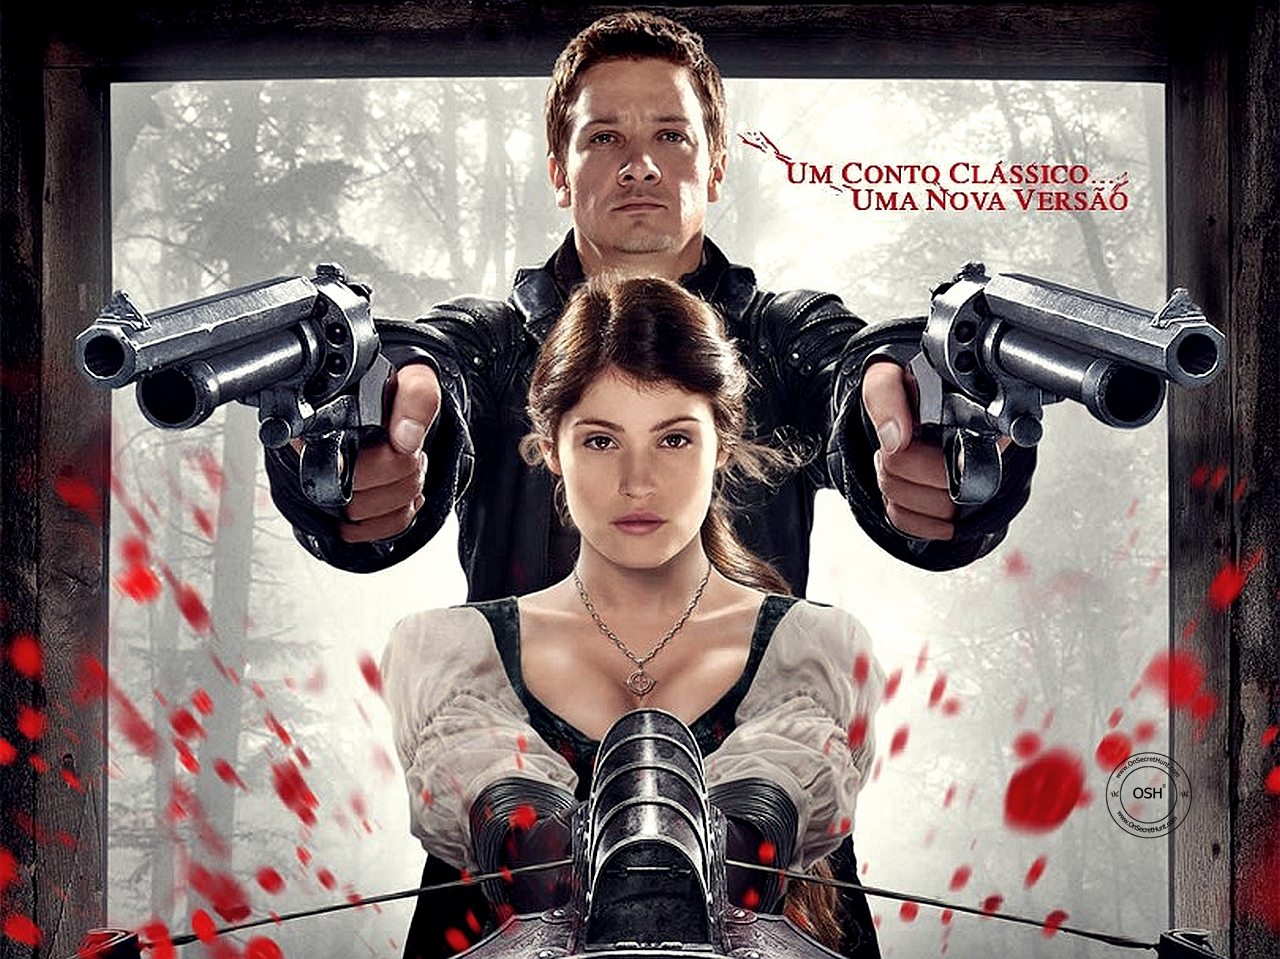 Hansel and Gretel: Witch Hunters (2013) Is A Fun Ride | Monster Movie Kid1280 x 959